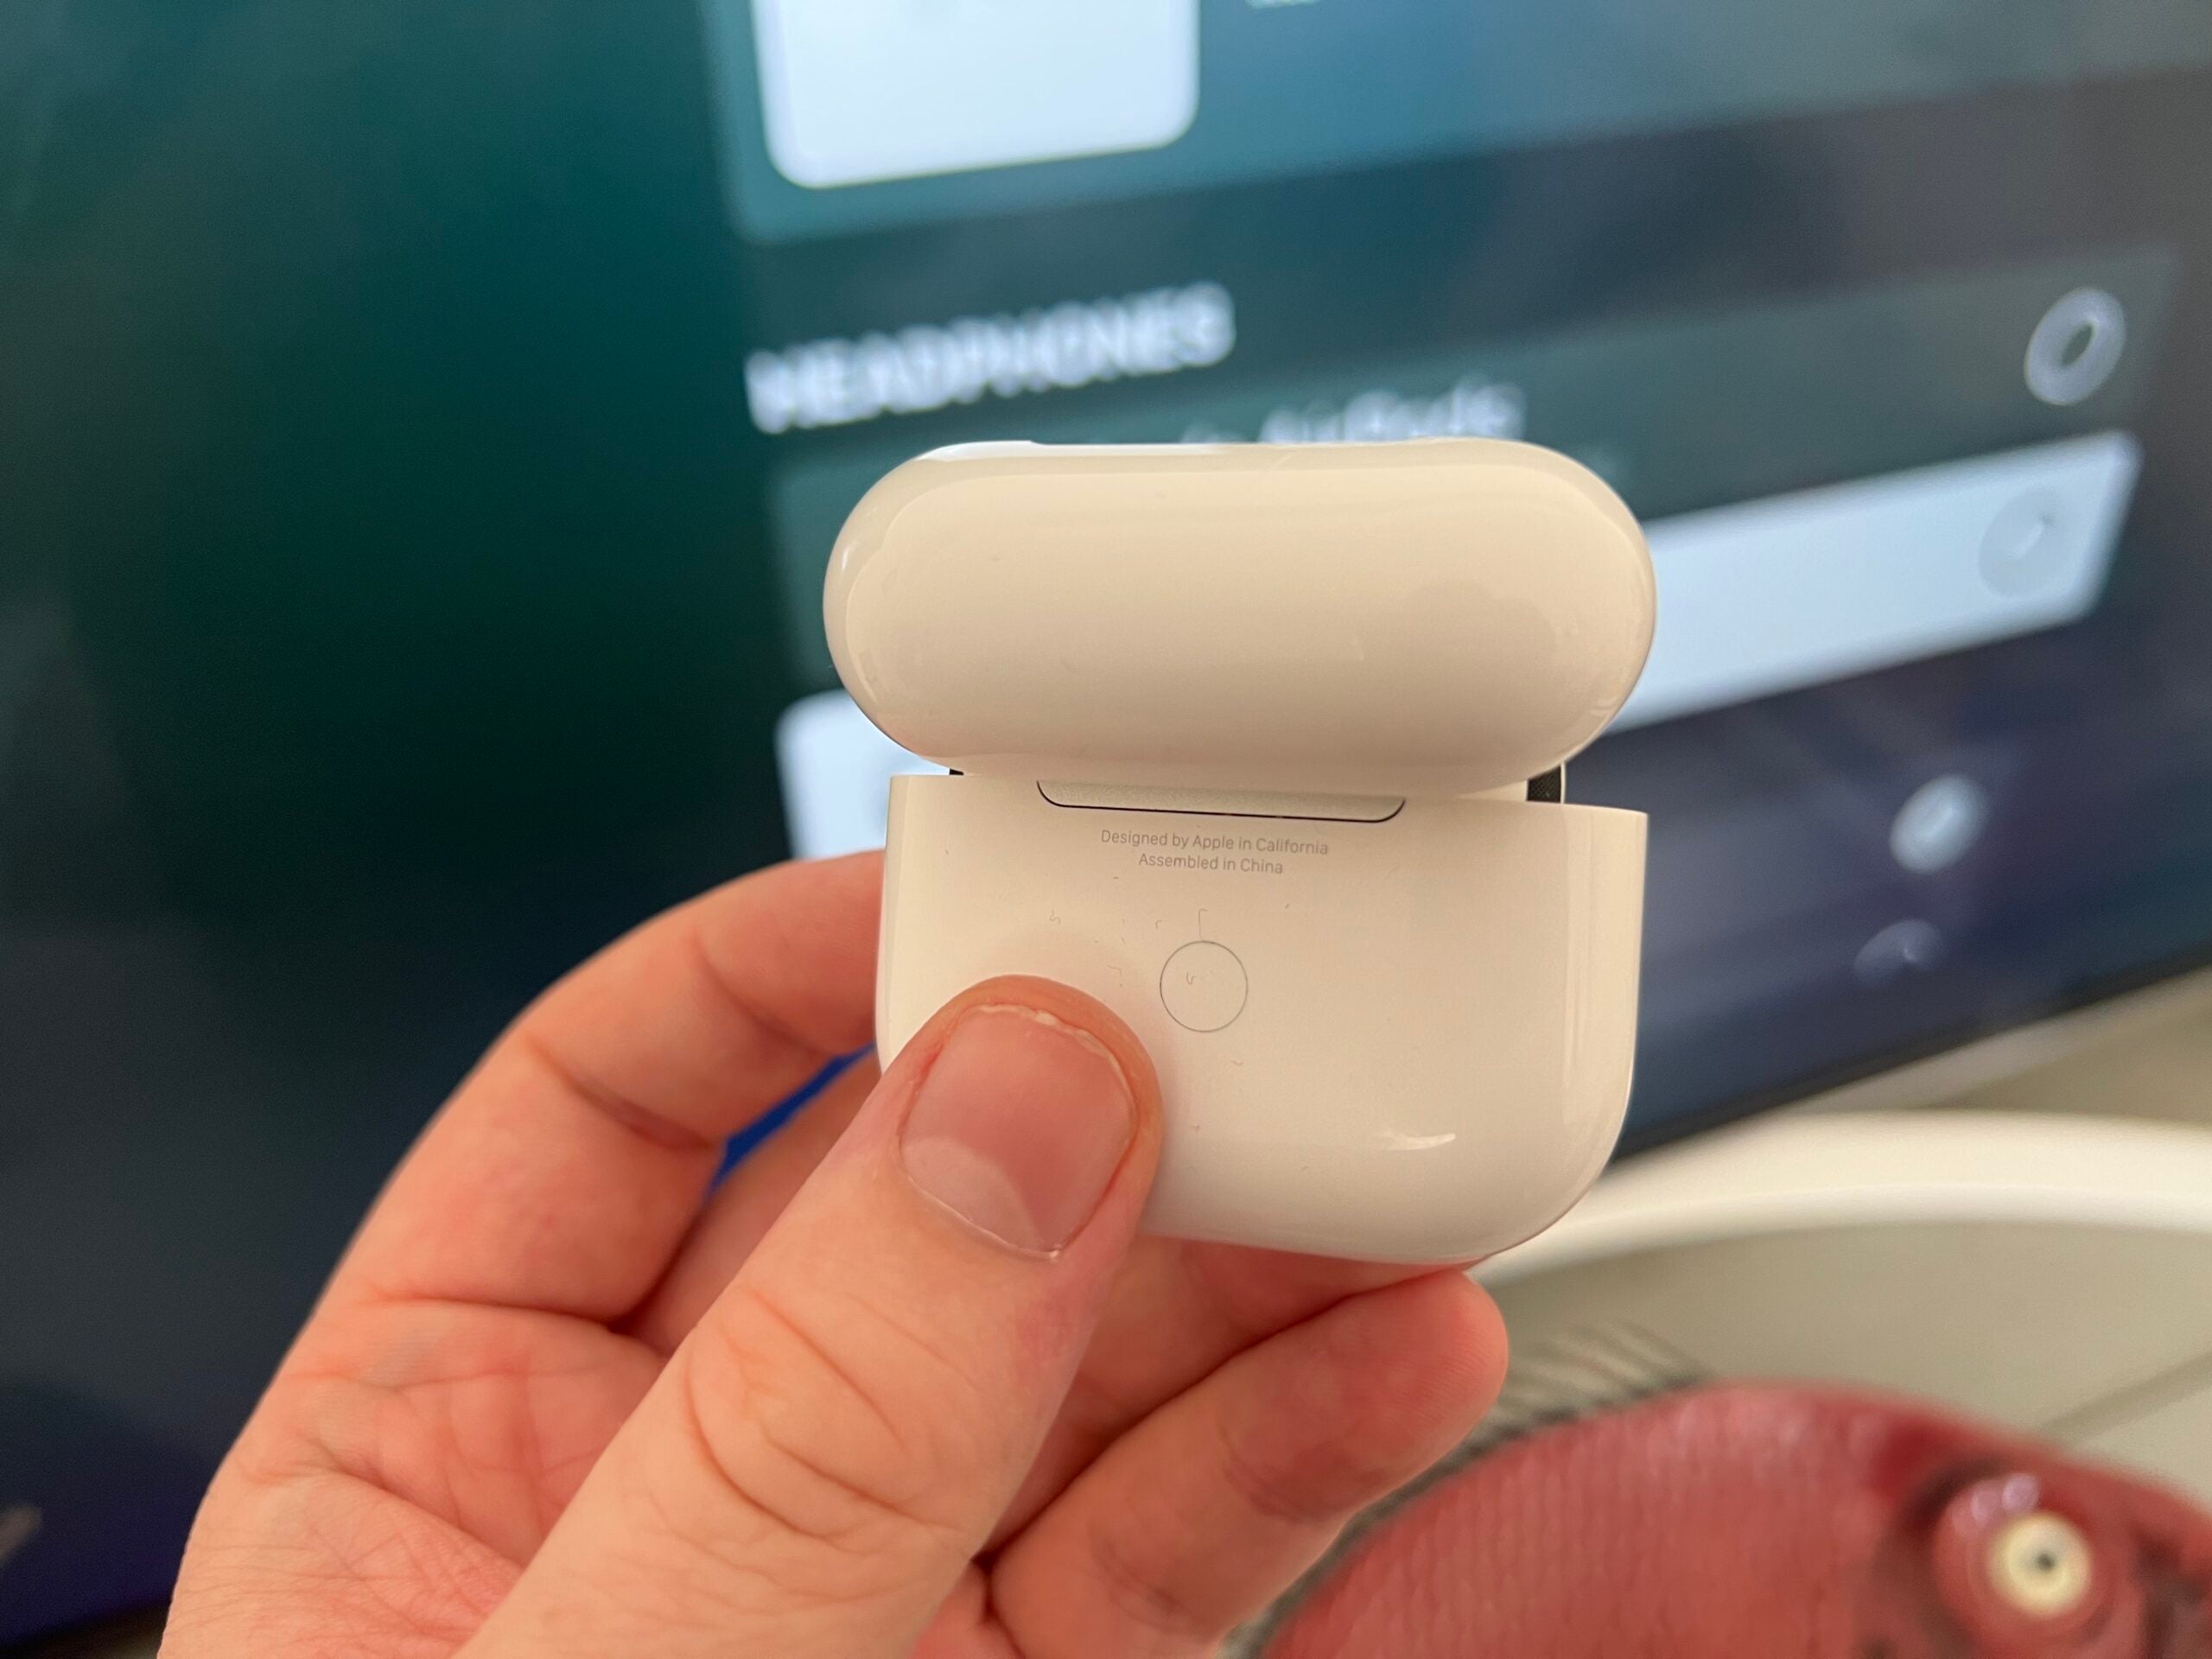 how to connect AirPods press the button on the back